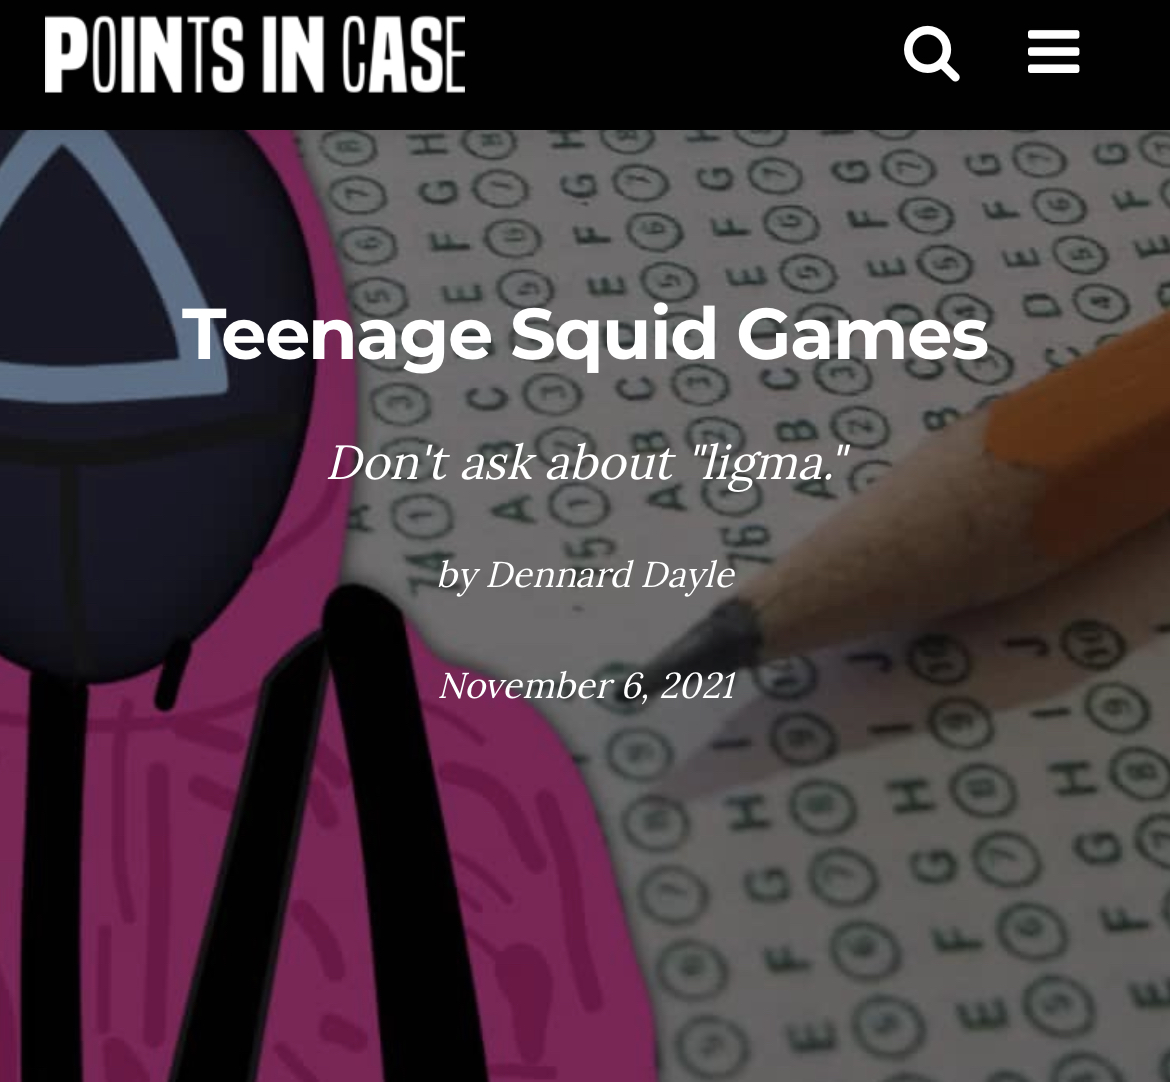 “Teenage Squid Games” on Points in Case